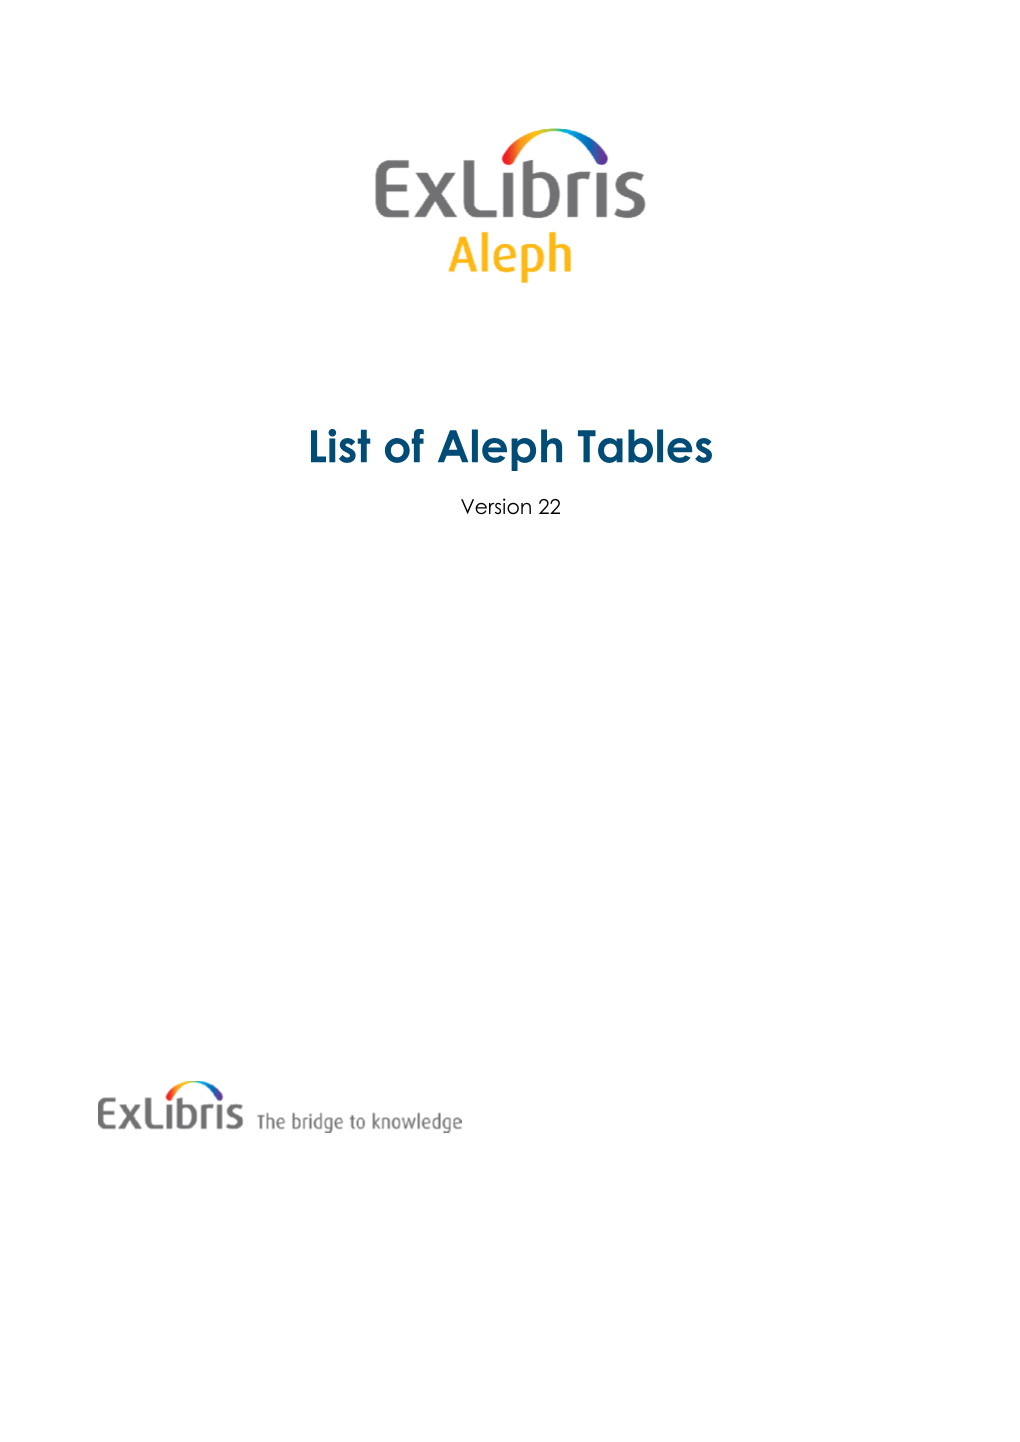 List of Aleph Tables